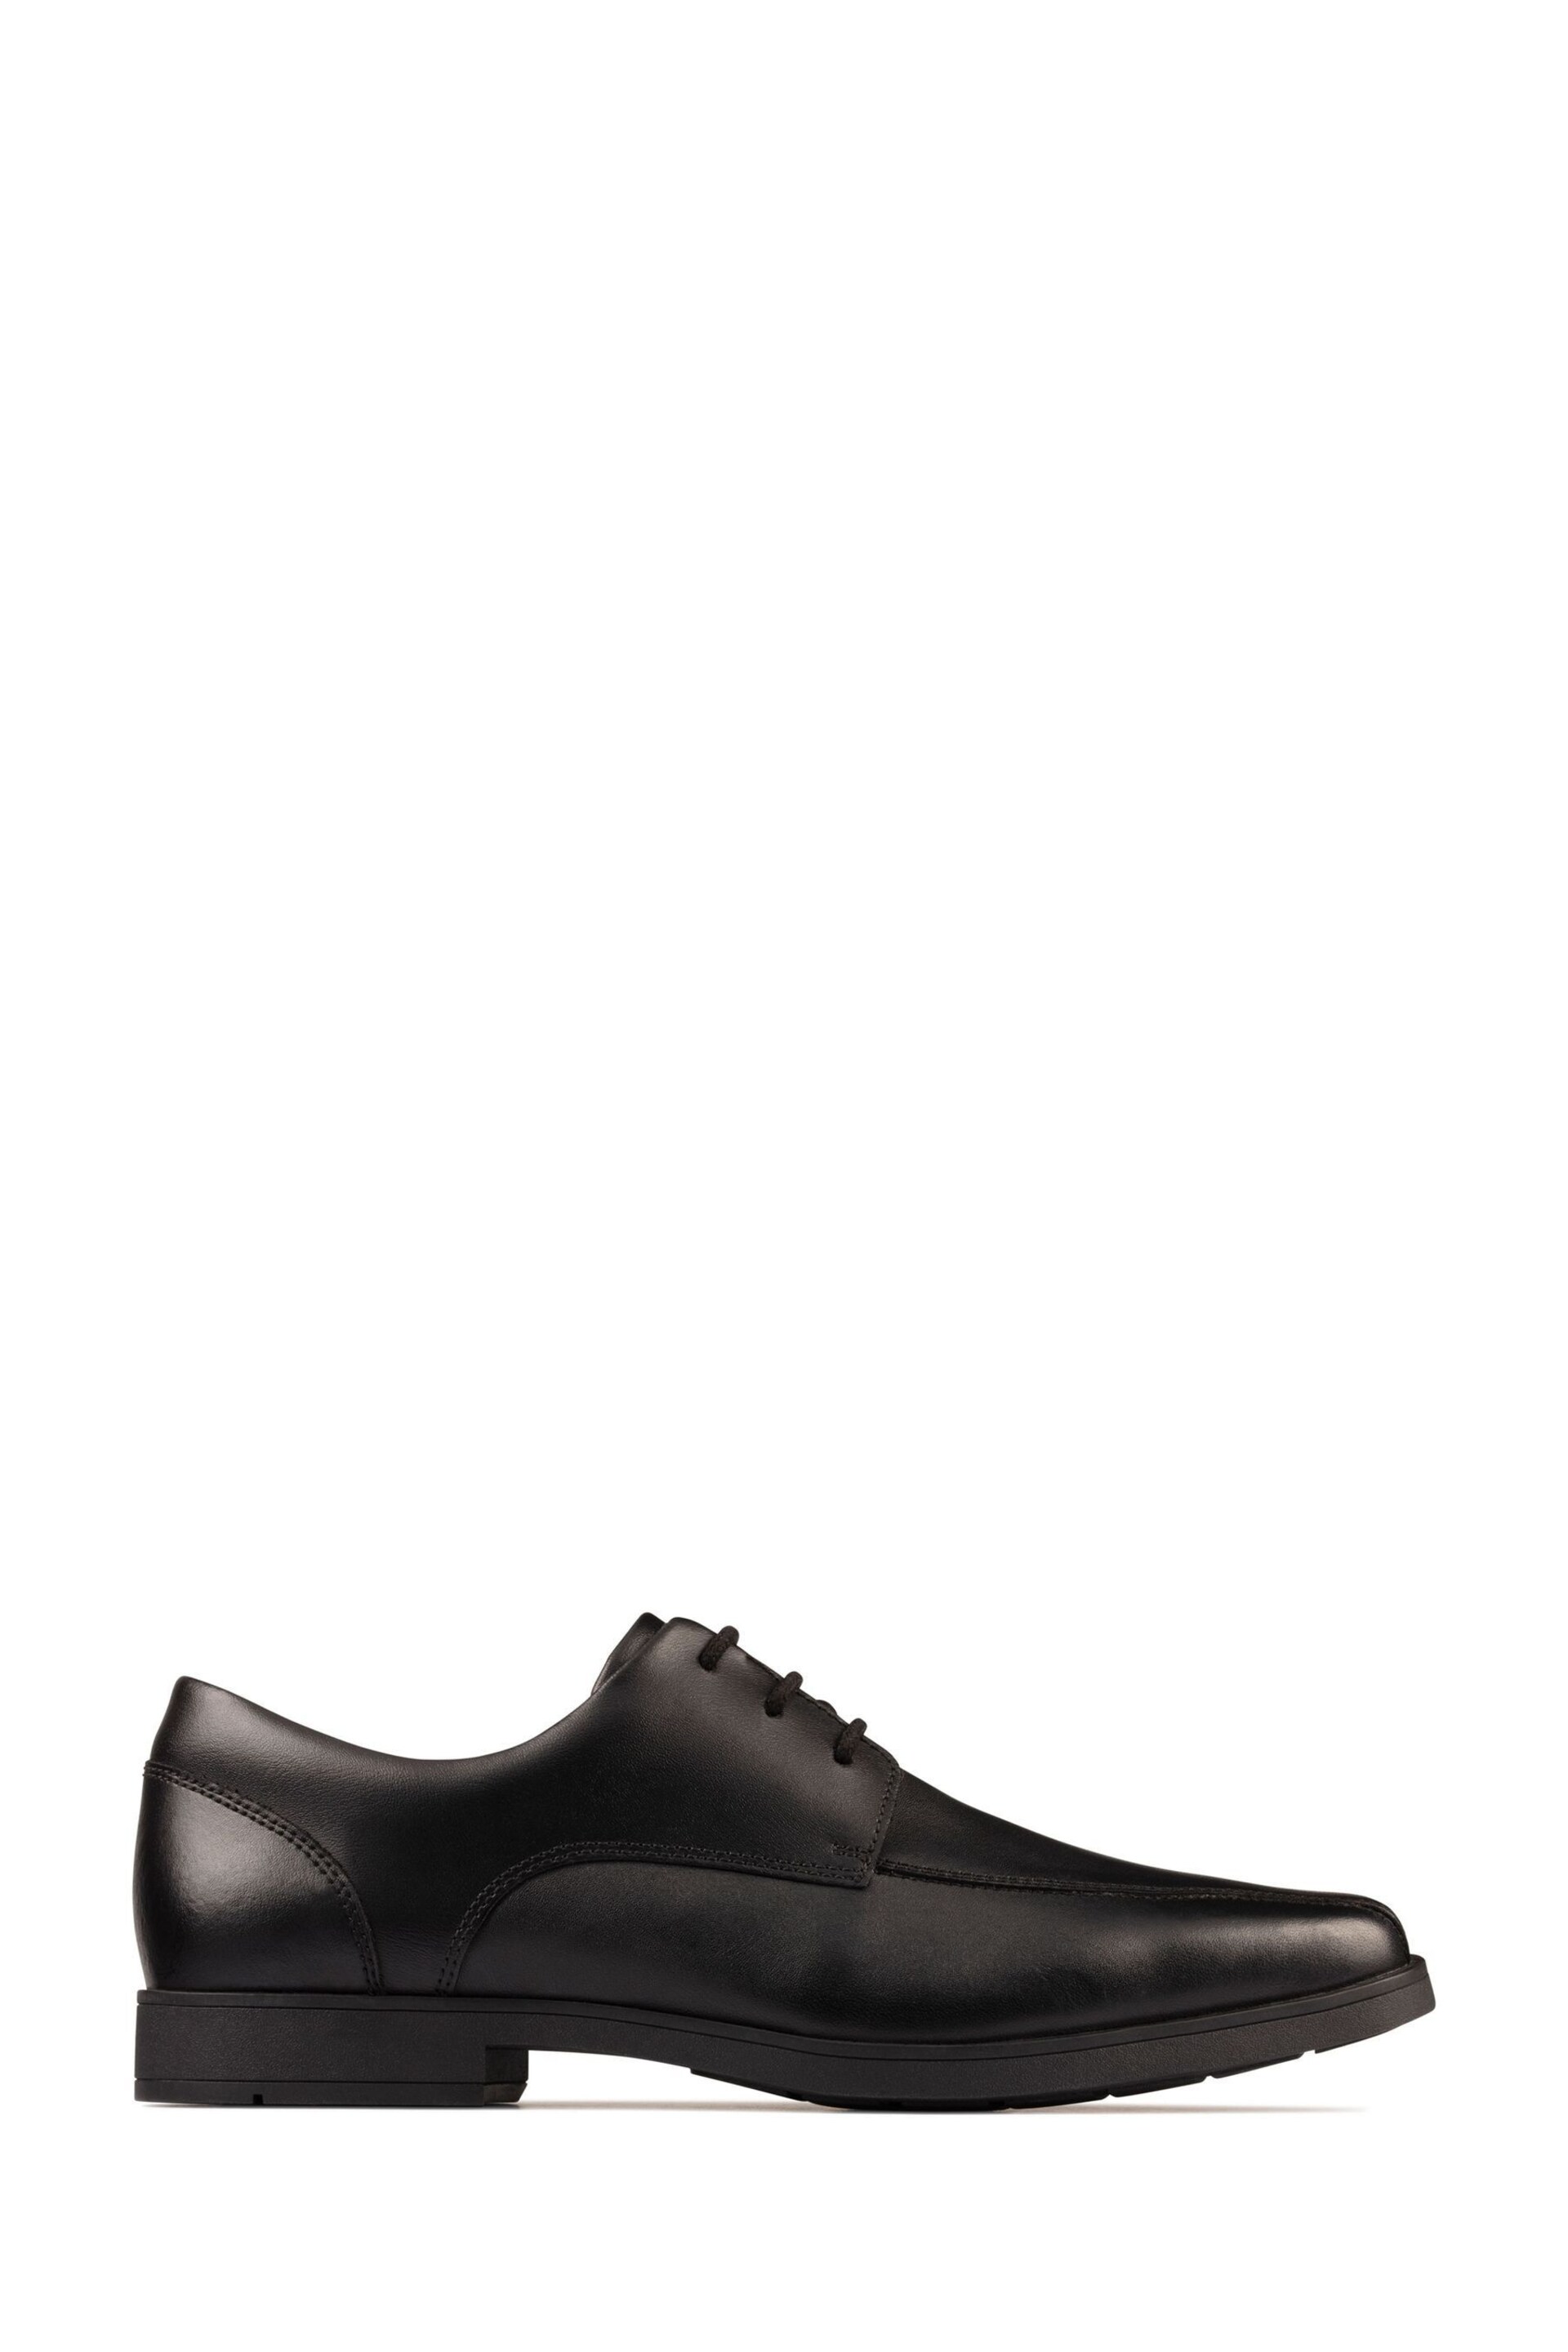 Clarks Black Leather Scala Step Shoes - Image 1 of 7